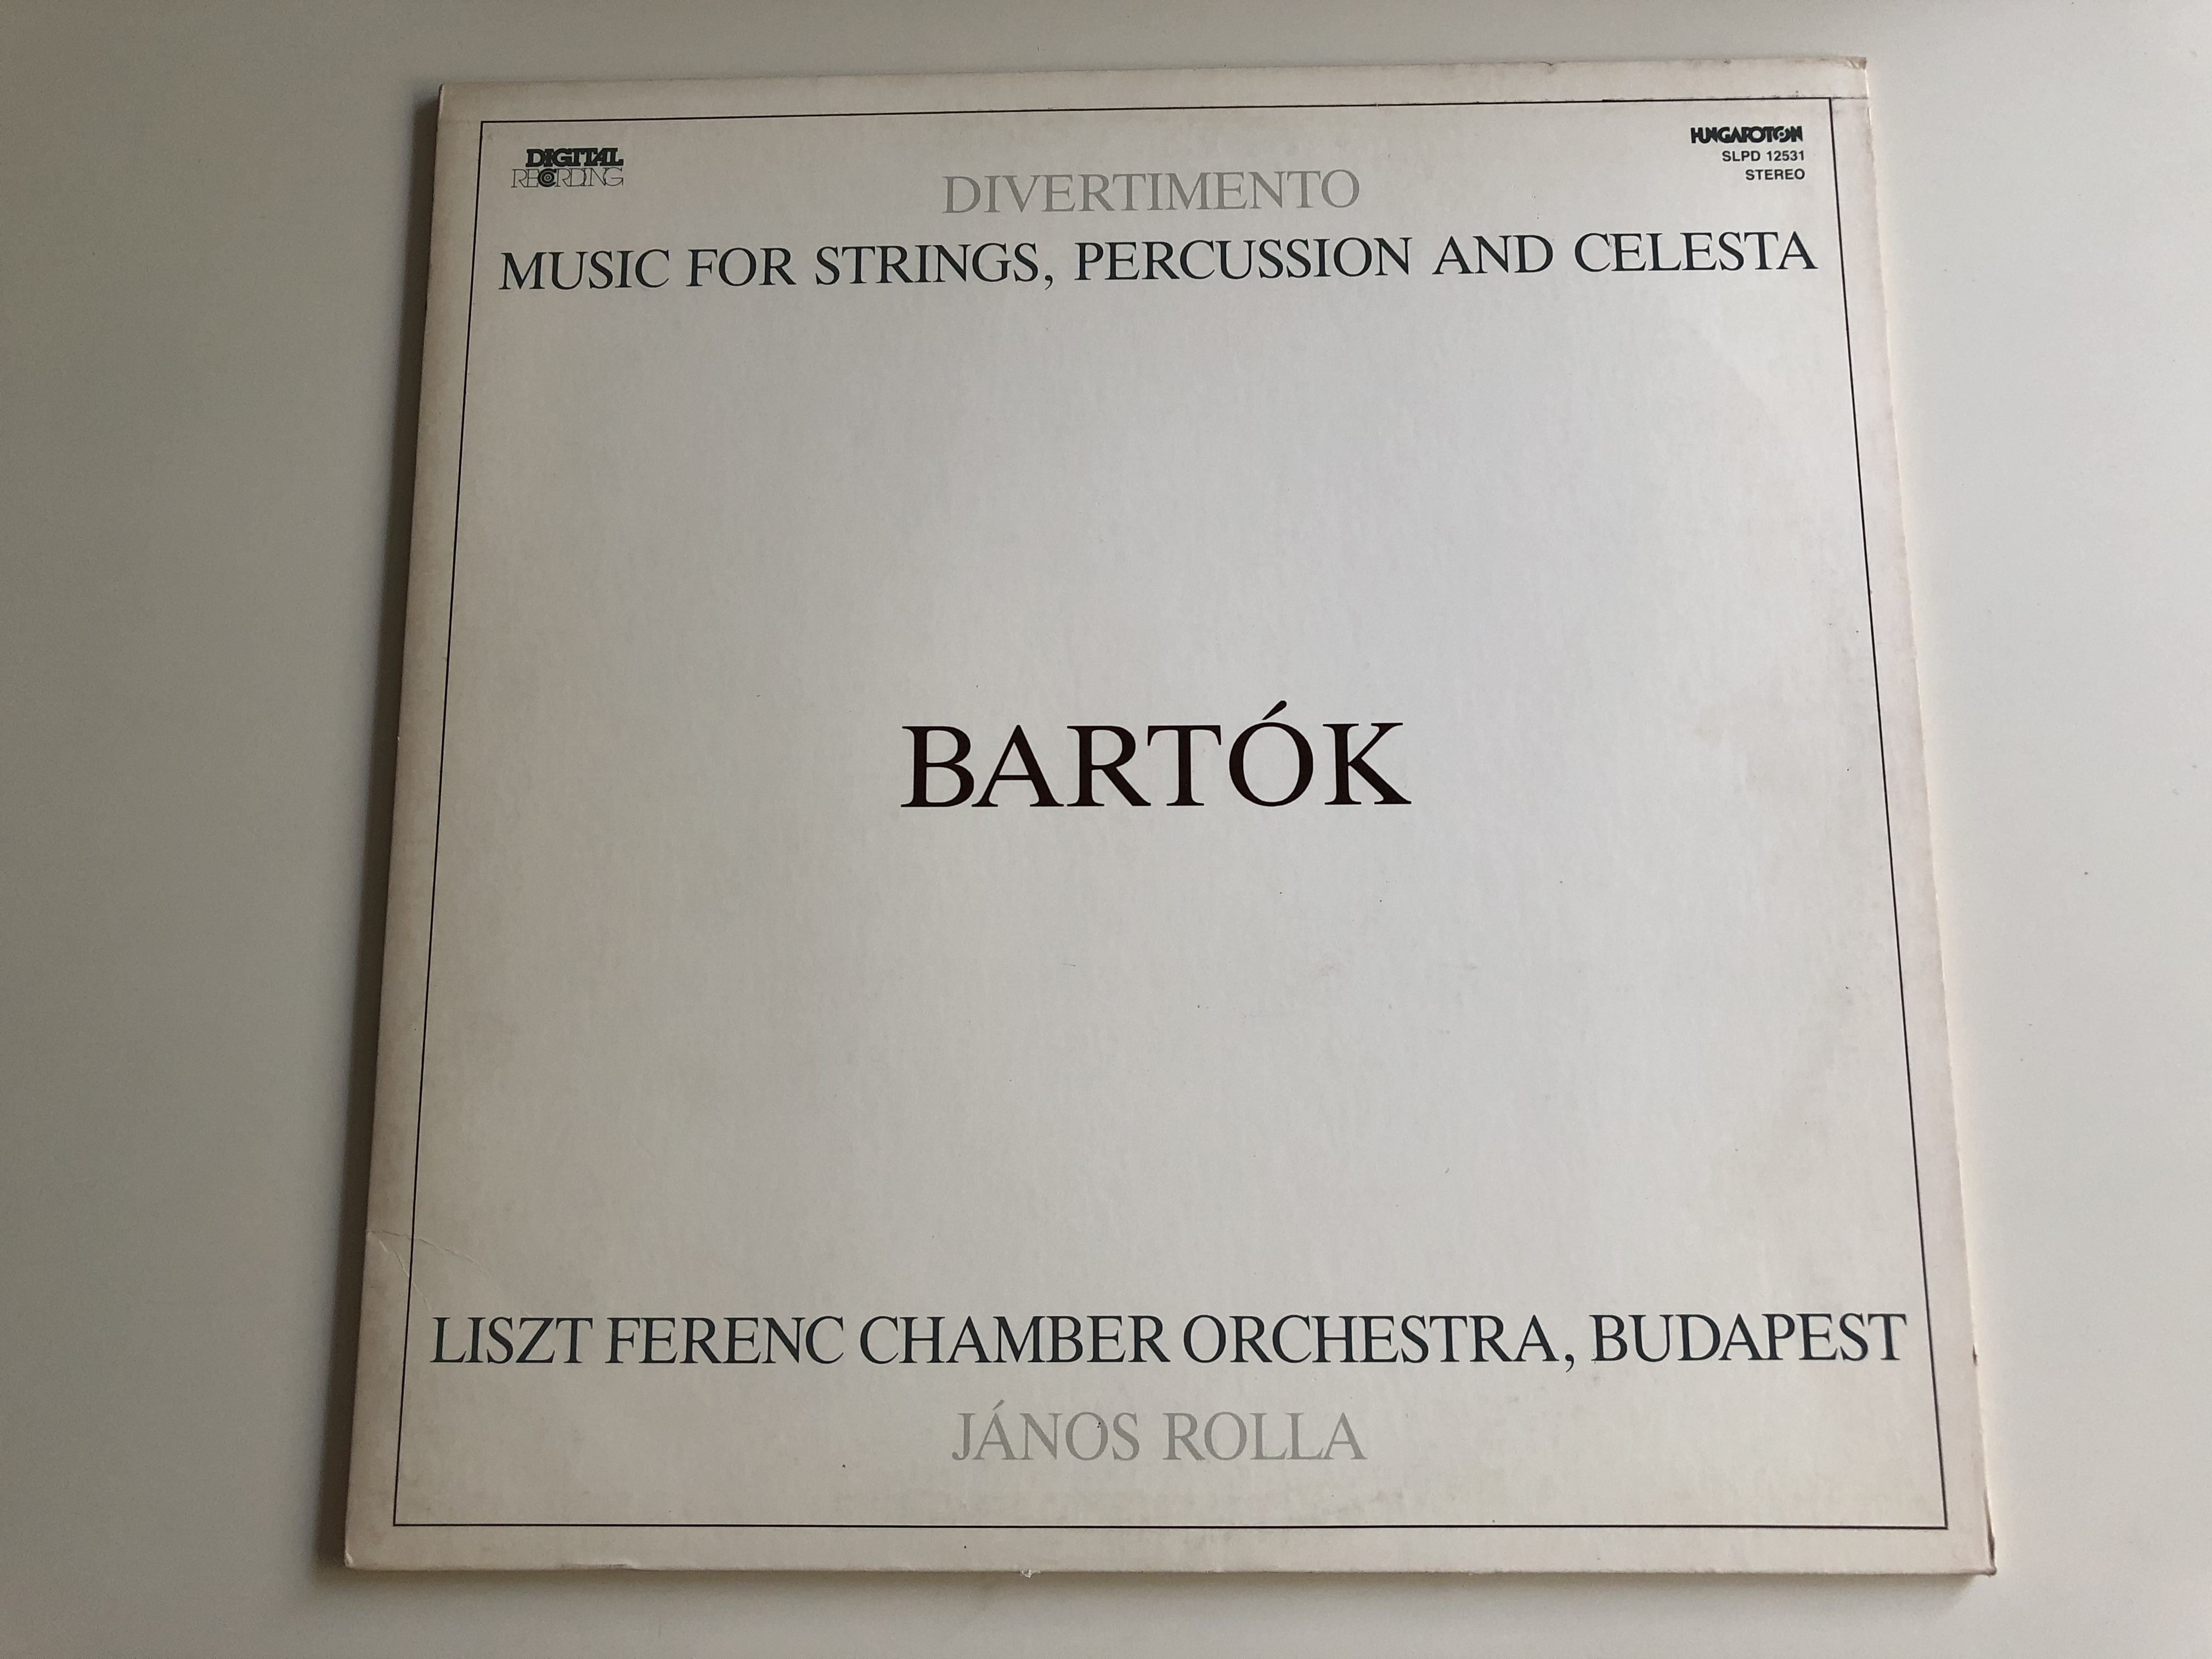 bart-k-divertimento-music-for-strings-percussion-and-celesta-conducted-j-nos-rolla-liszt-ferenc-chamber-orchestra-budapest-hungaroton-lp-stereo-slpd-12531-1-.jpg